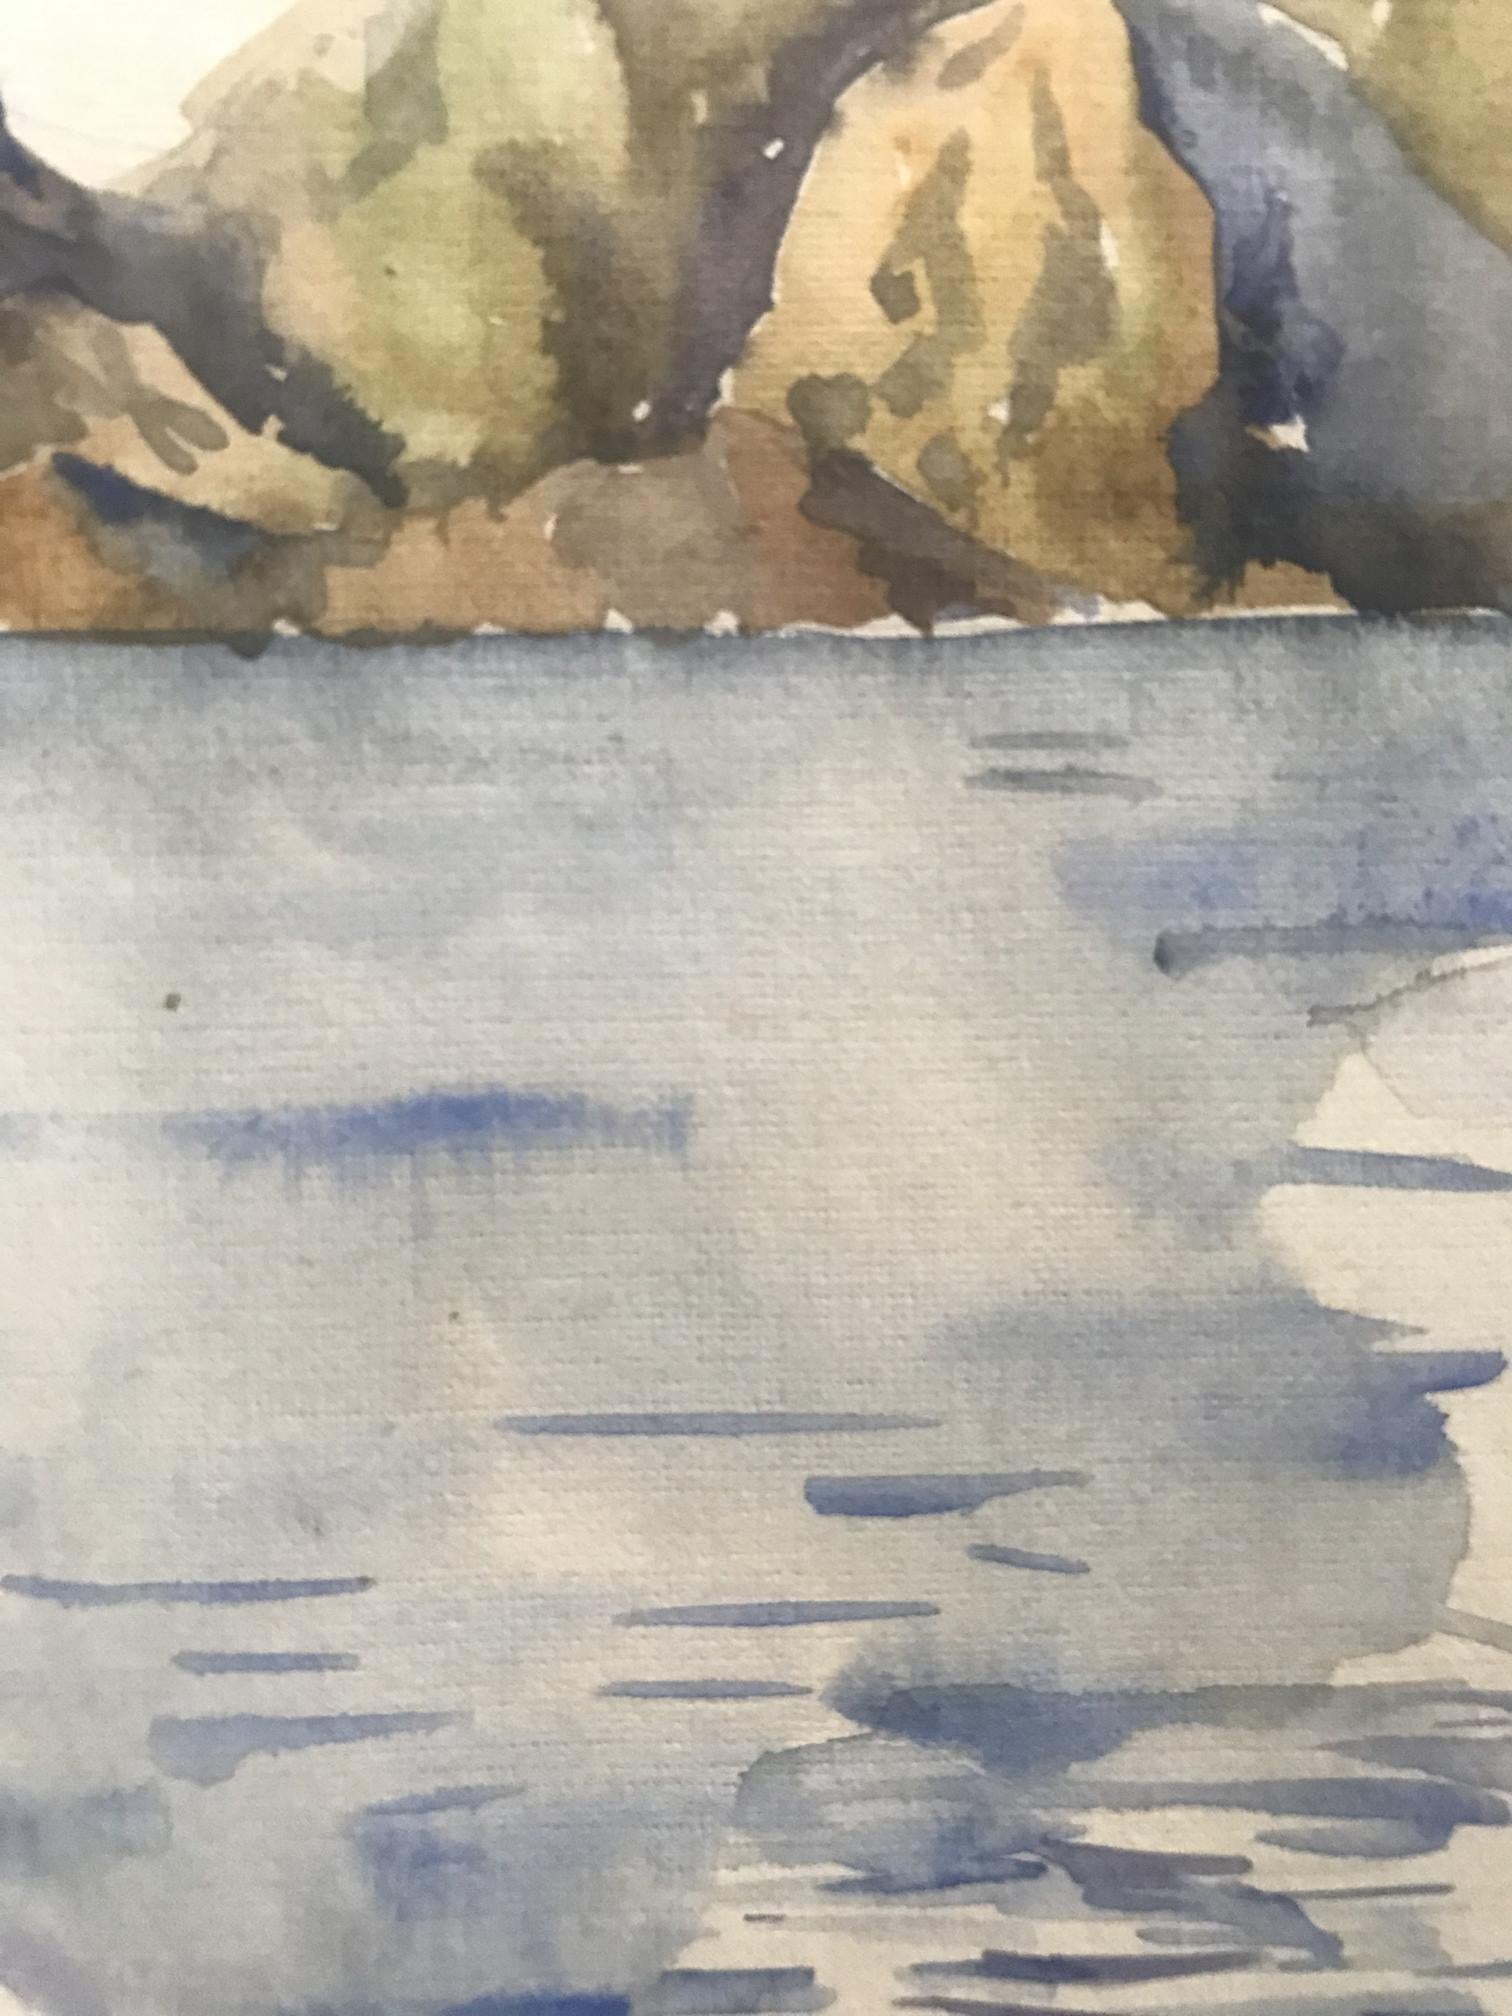 The beauty of the ocean is depicted in this watercolor painting, "Seascape"